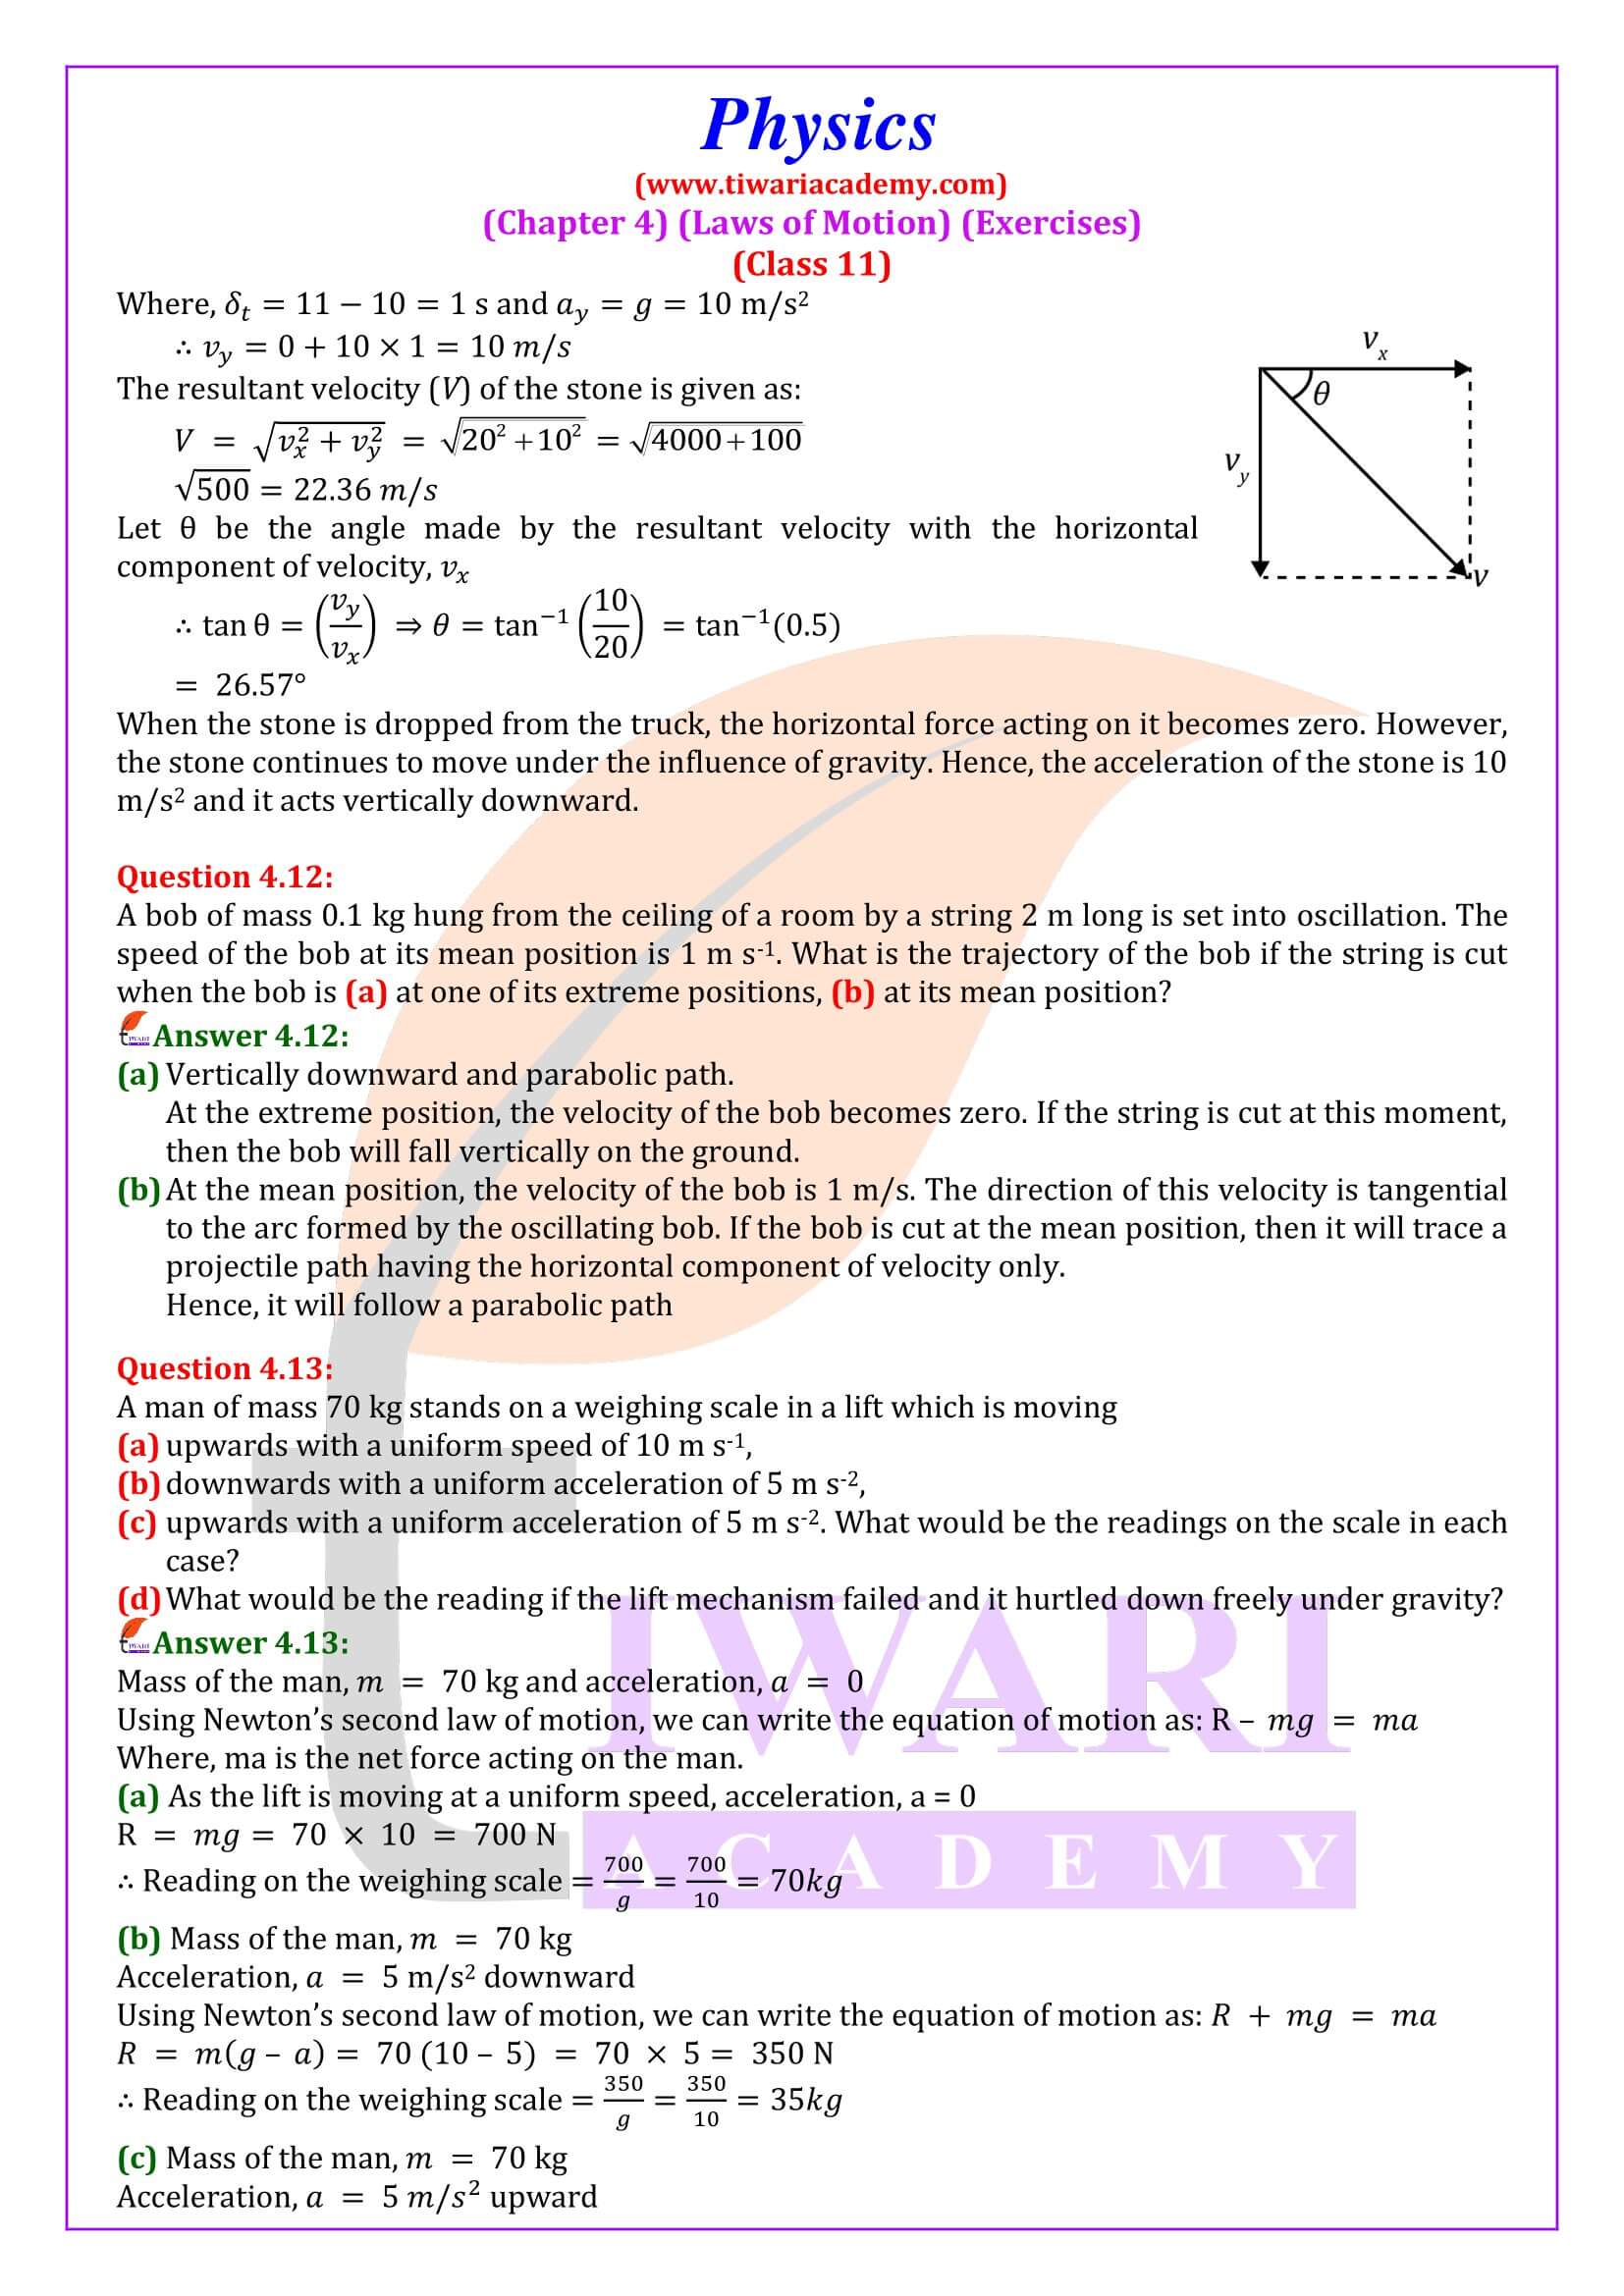 NCERT Solutions for Class 11 Physics Chapter 4 free to use